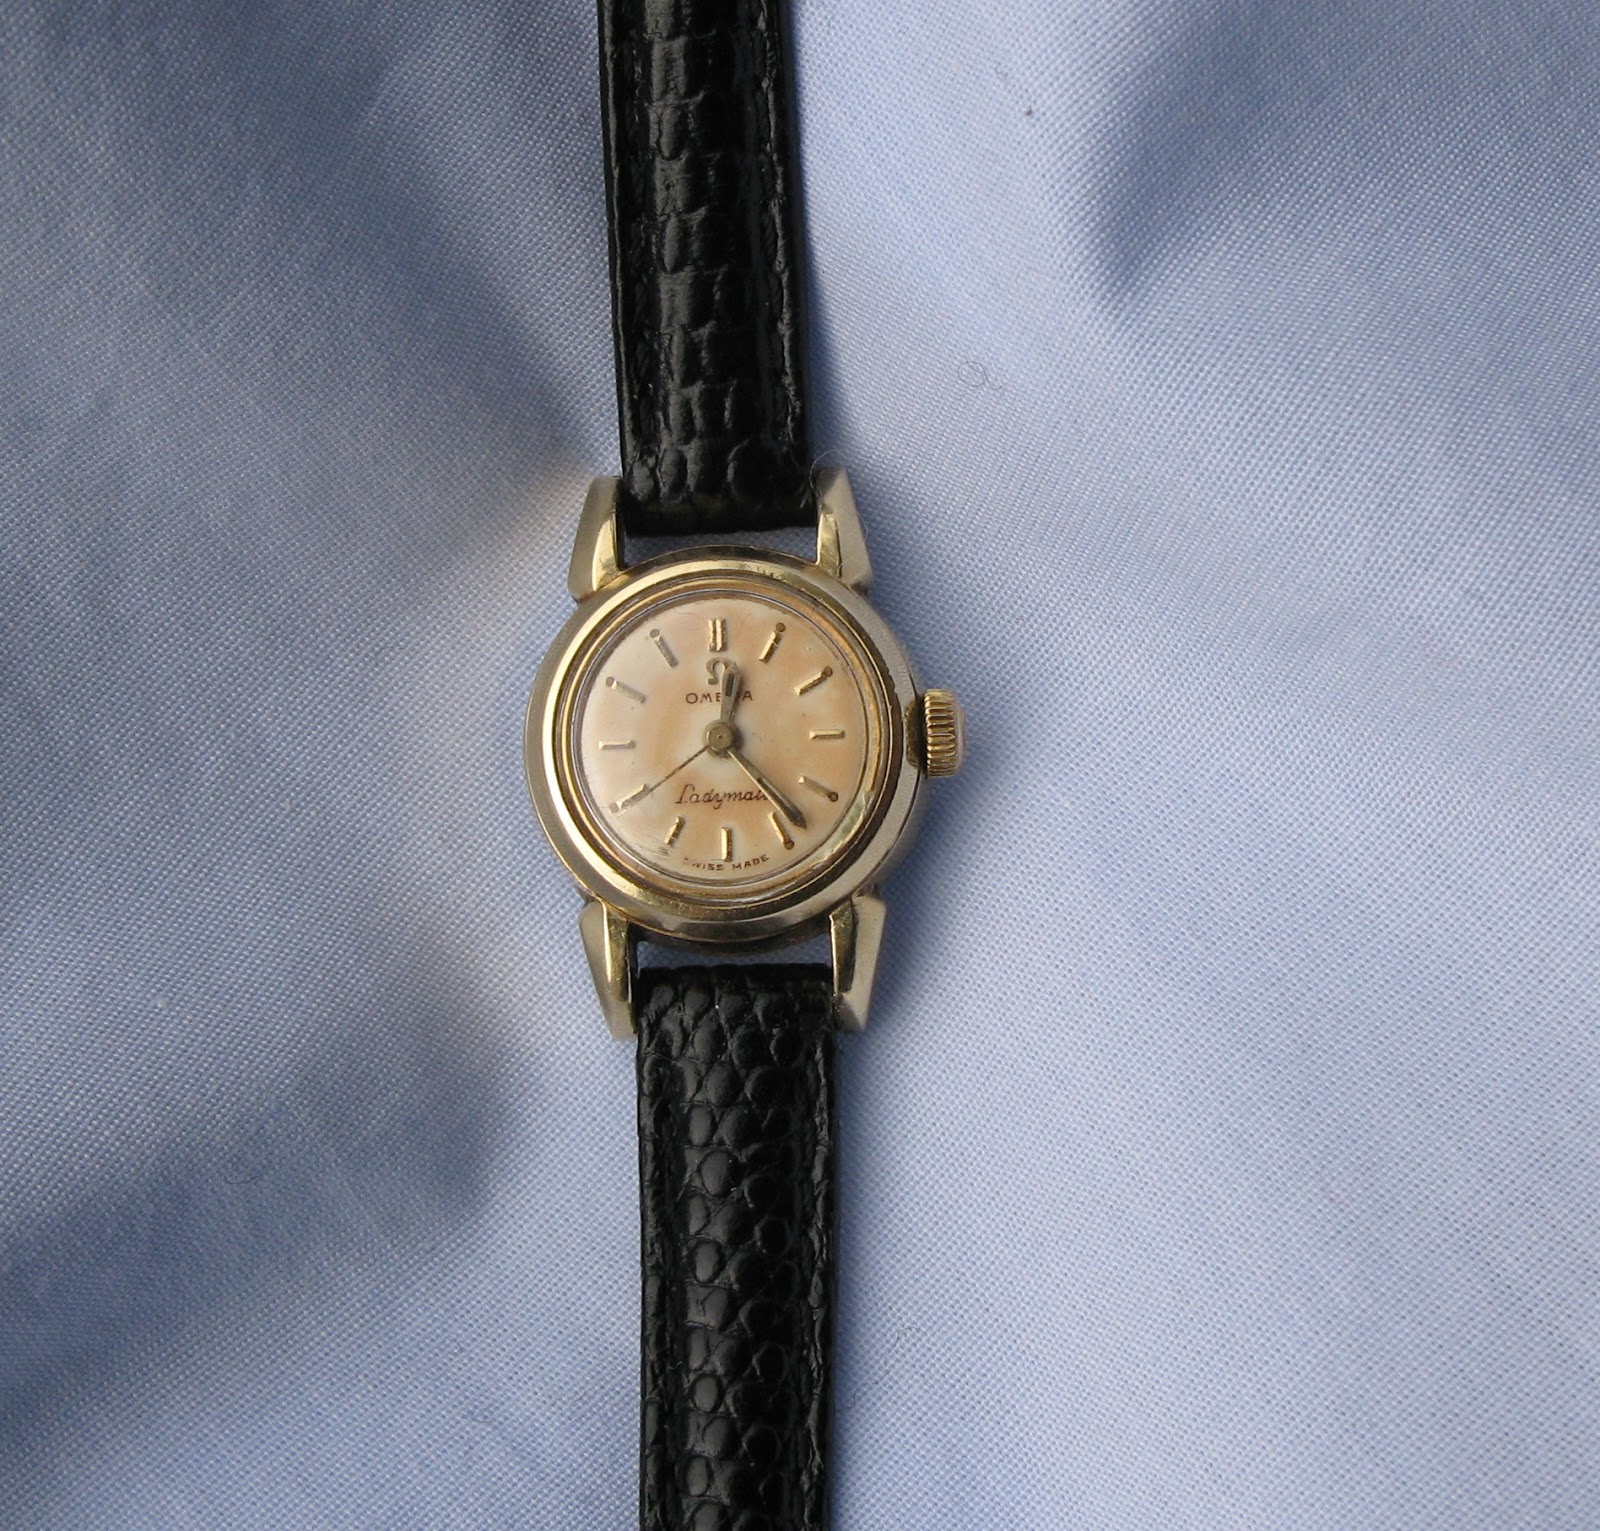 Andy B Vintage Watches: FOR SALE - Late 1950's Ladies ...